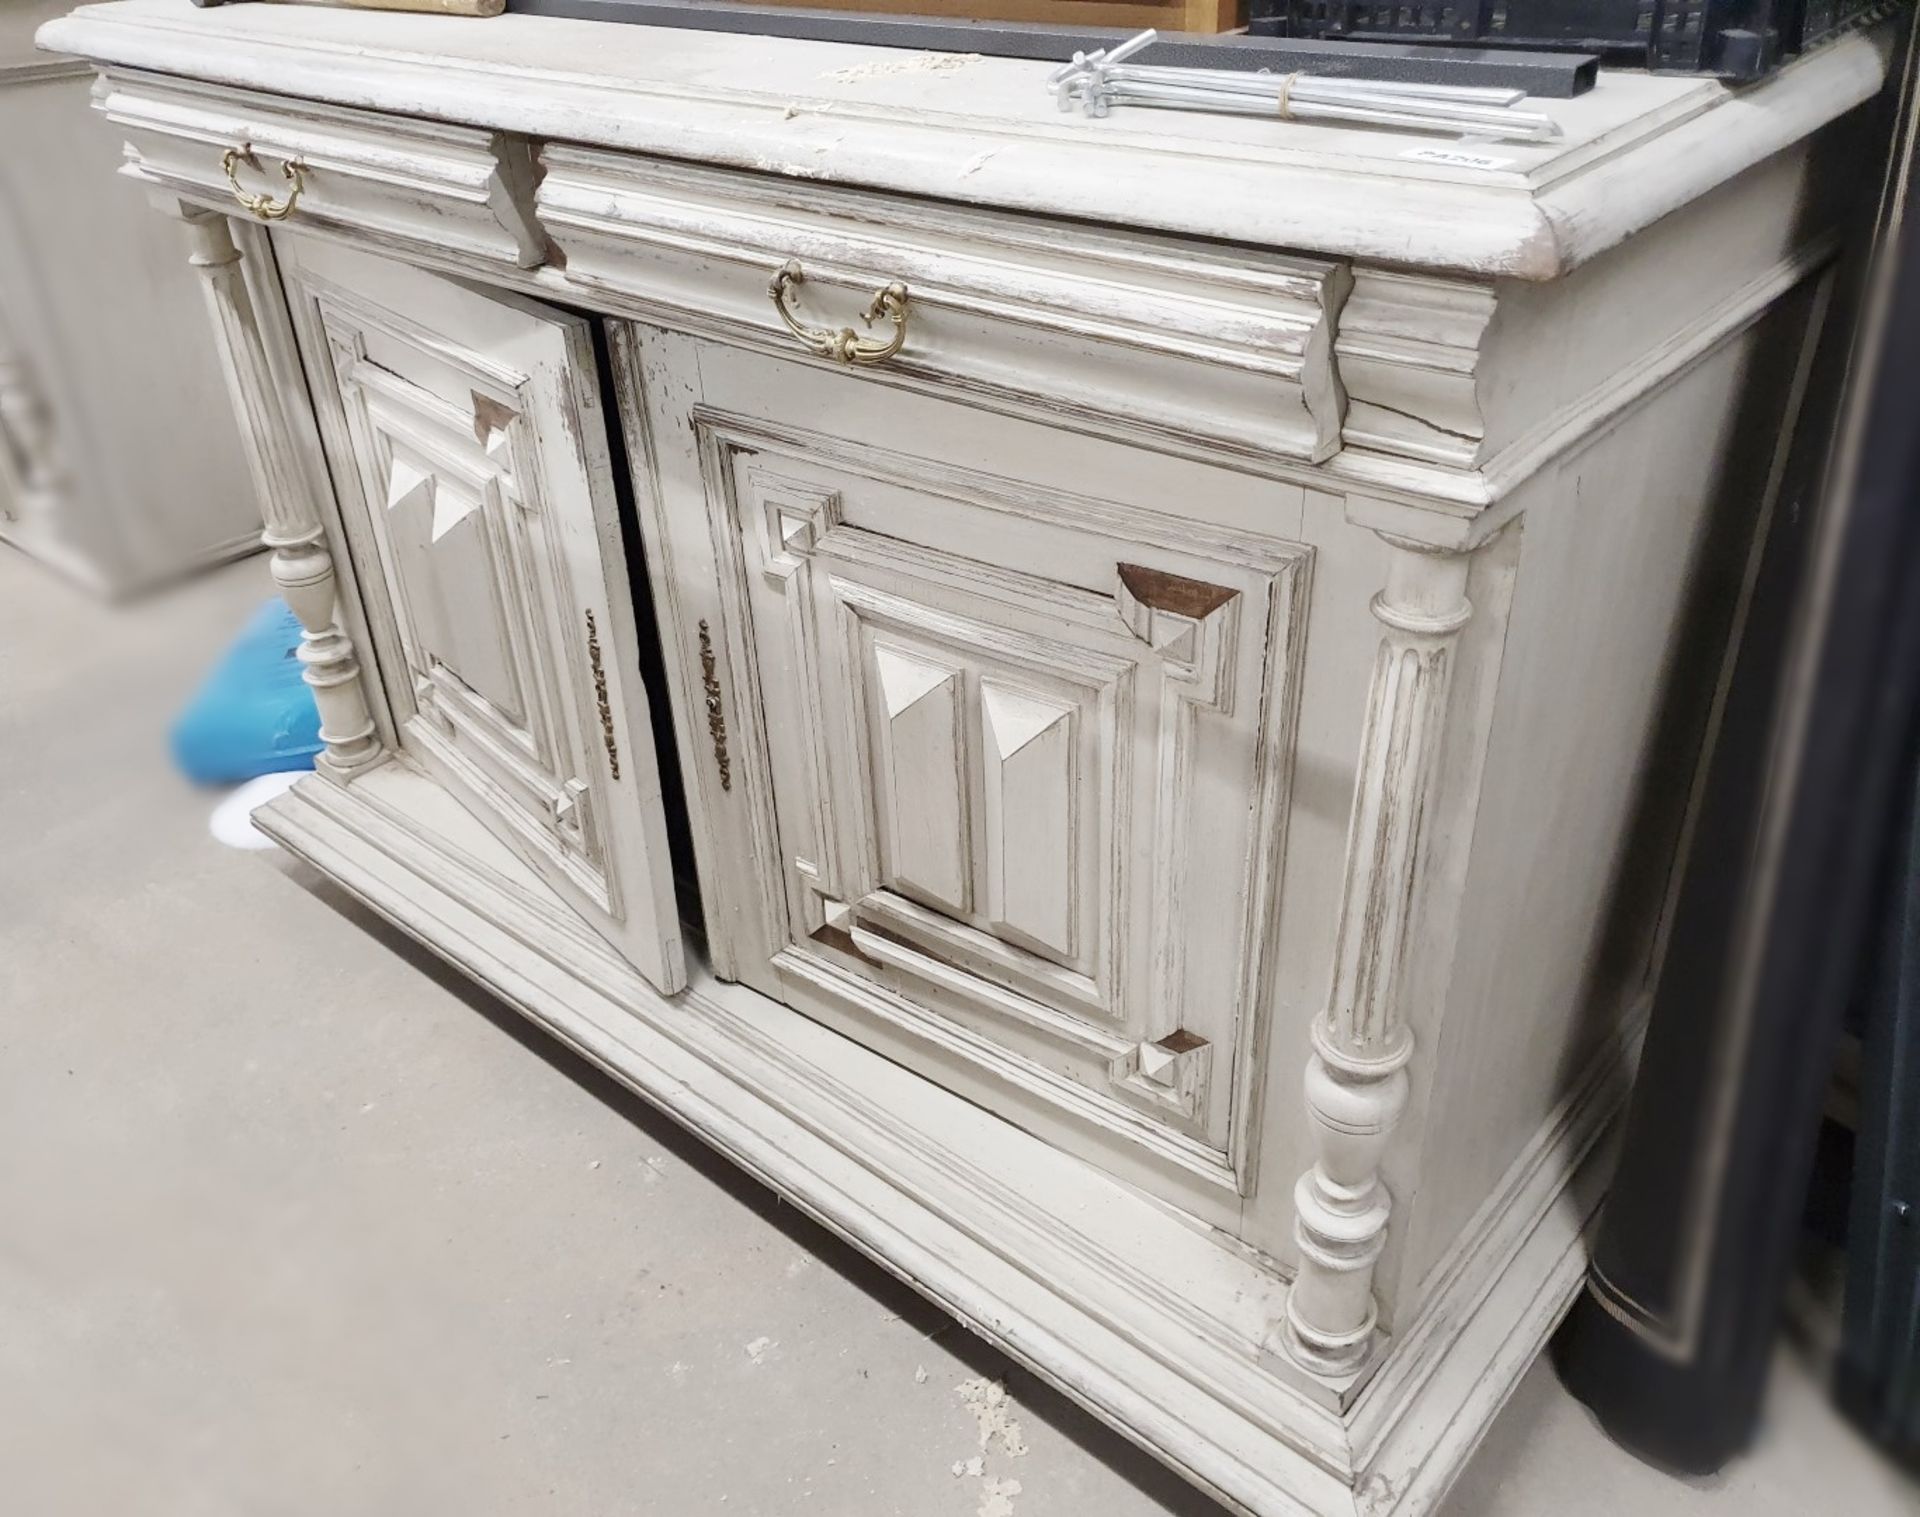 1 x Shabby Chic Dresser in Distressed White - H102/205 x W147 x D66 cms - Ref PA206 - CL463 - - Image 2 of 9